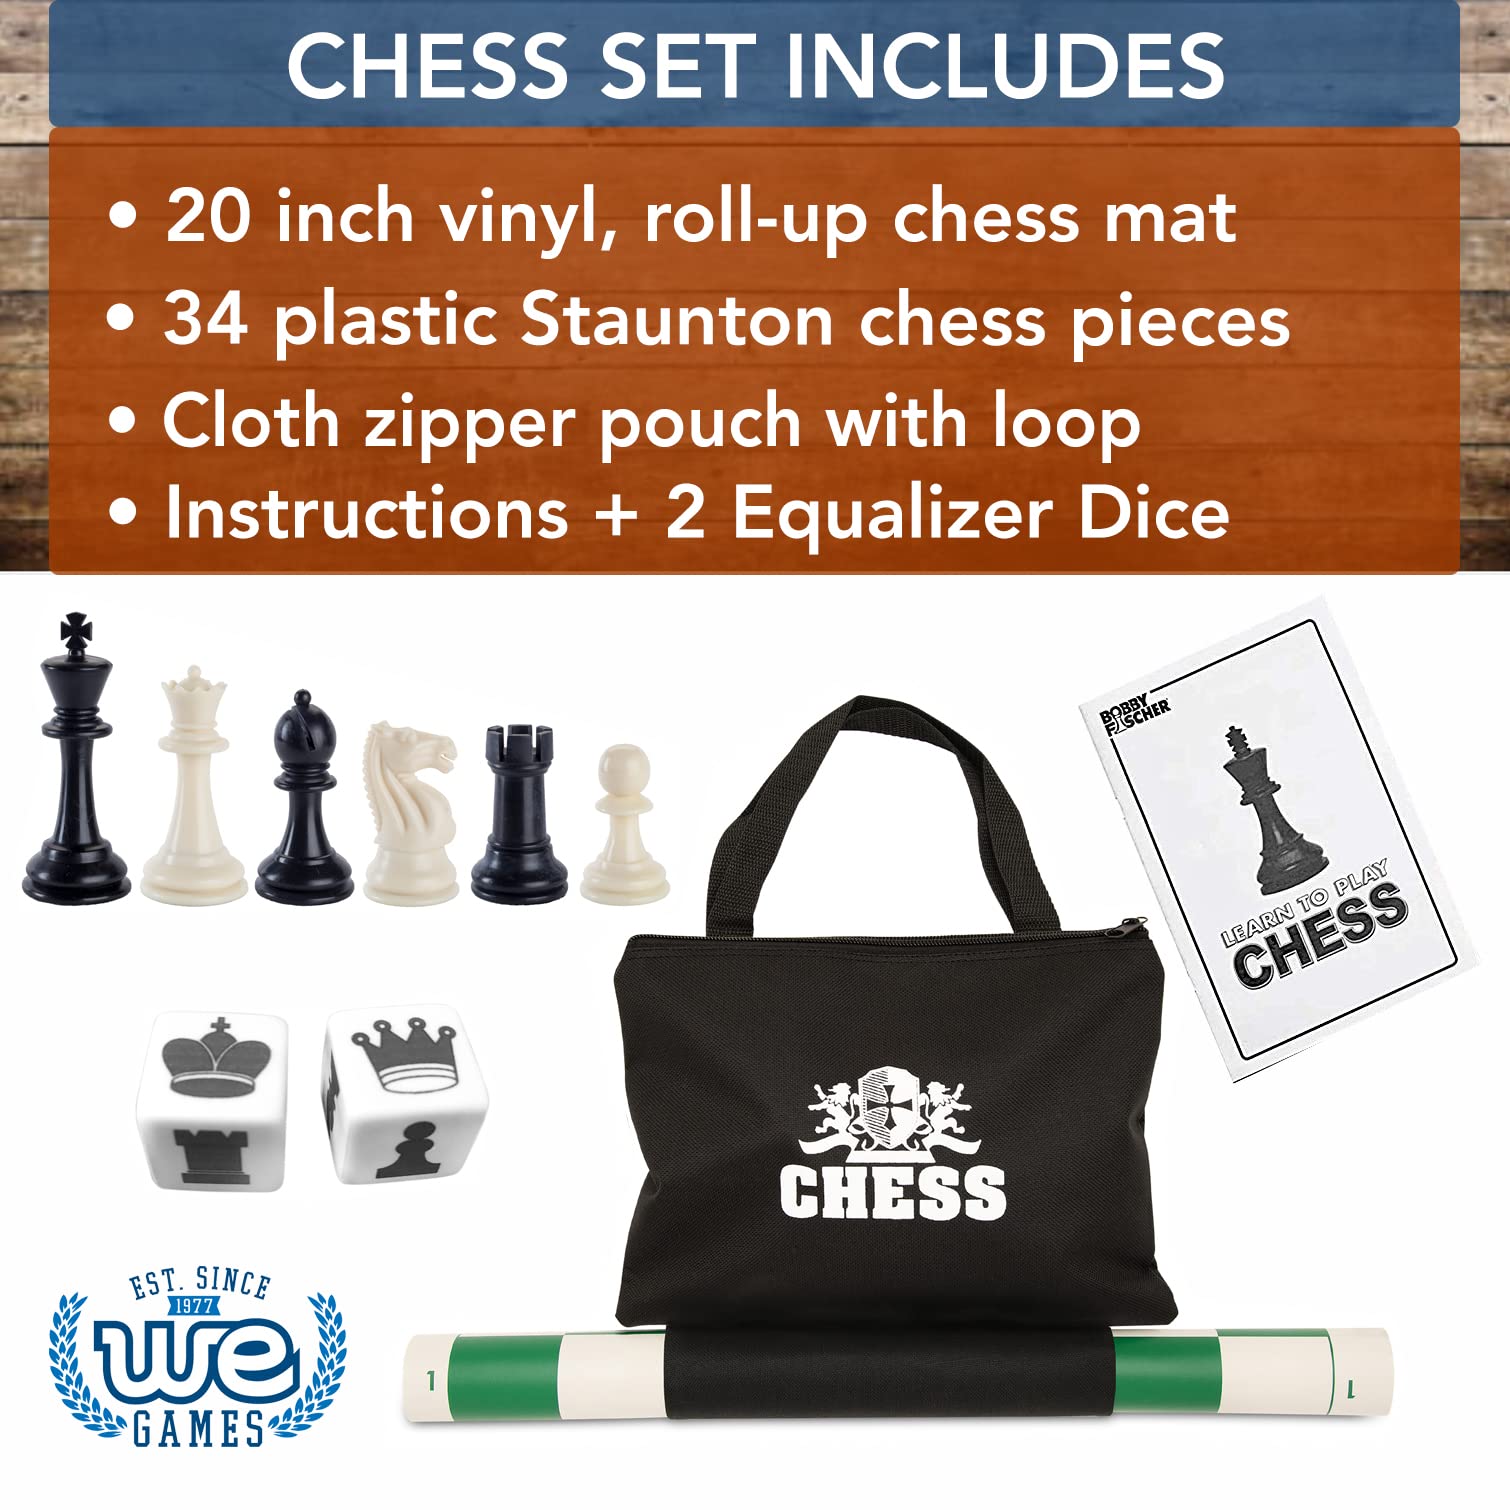 WE Games Best Value Tournament Chess Set - Staunton Chess Pieces and Green Roll-Up Vinyl Chess Board